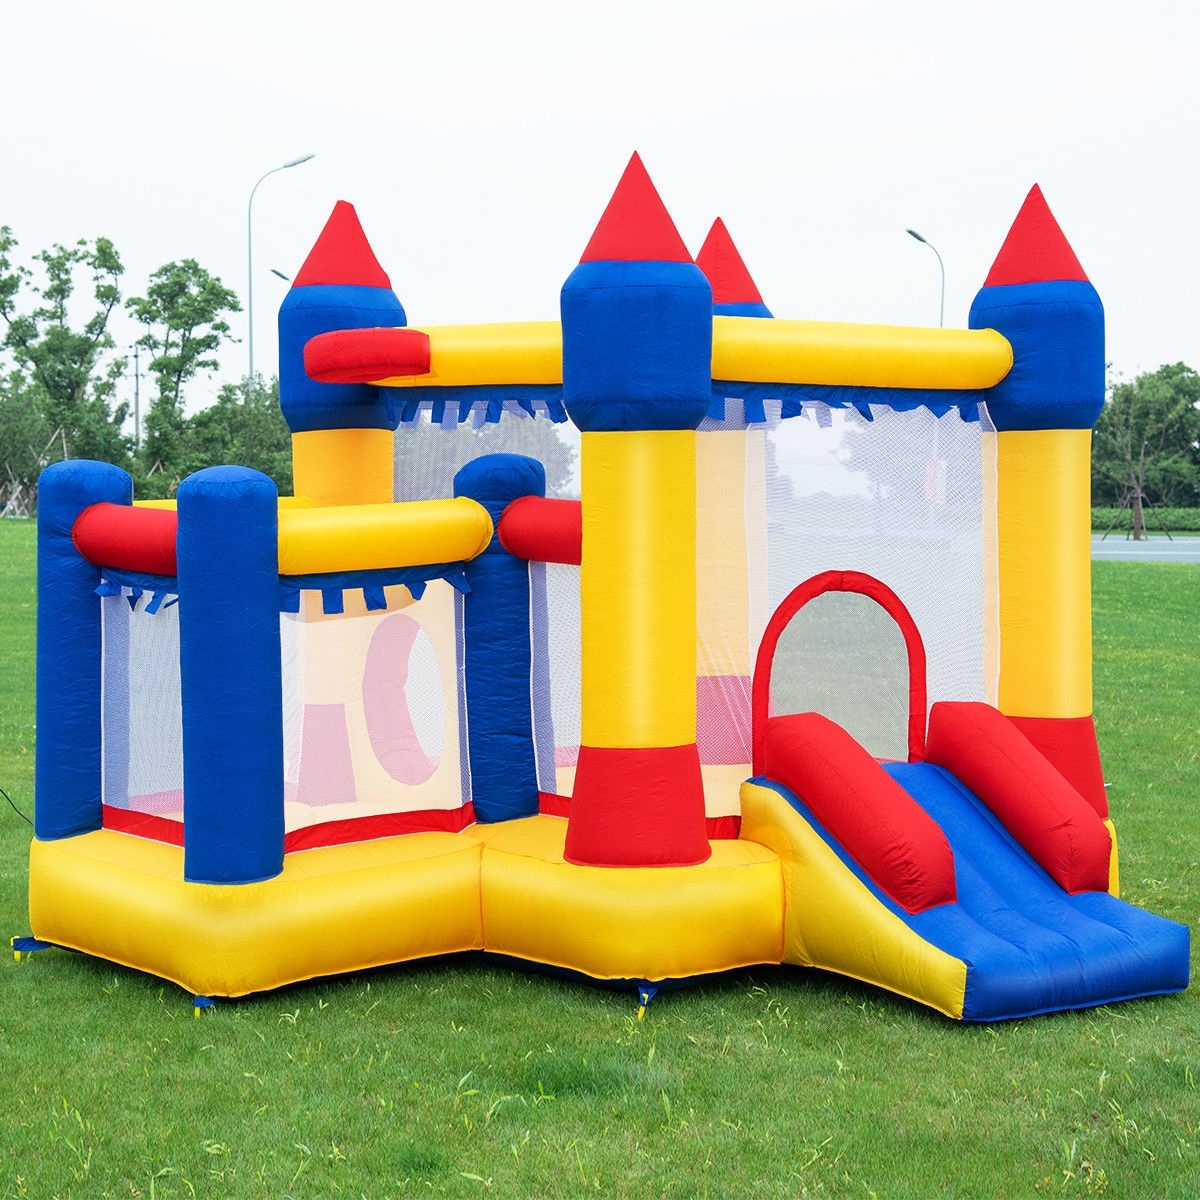 Outdoor Play Find Great Toys Hobbies Deals Shopping At Overstockcom